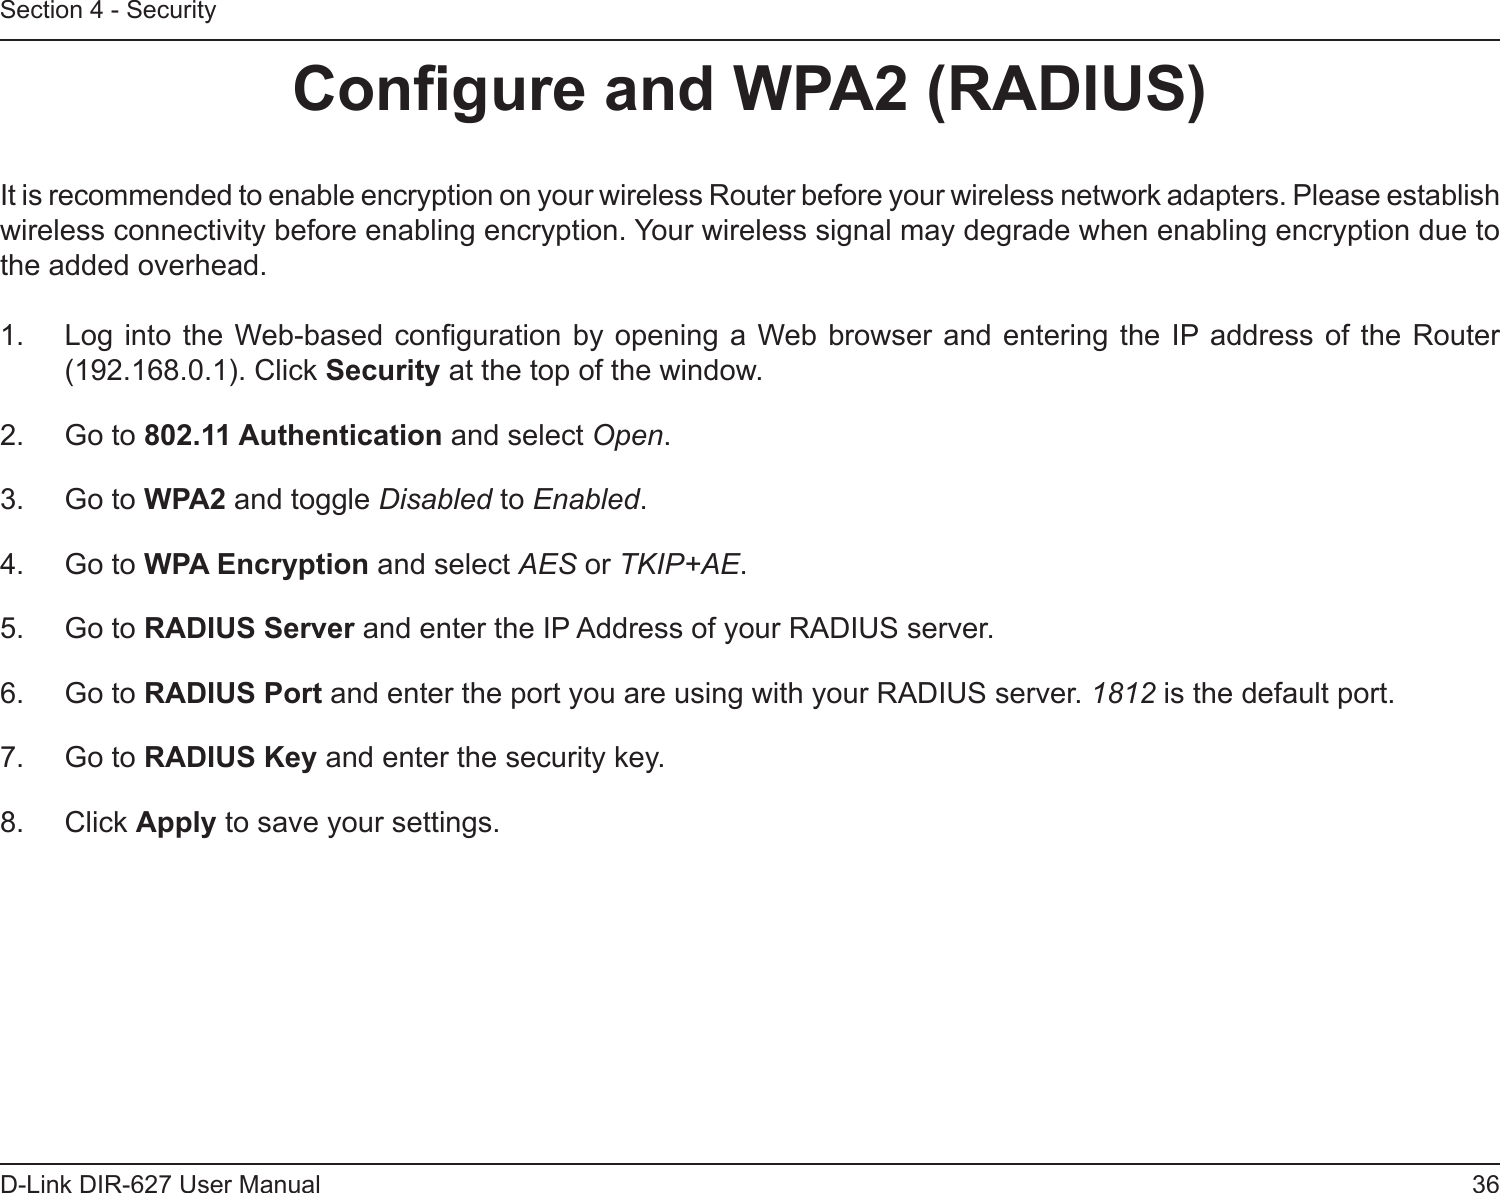 36D-Link DIR-627 User ManualSection 4 - SecurityCongureandWPA2(RADIUS)It is recommended to enable encryption on your wireless Router before your wireless network adapters. Please establish wireless connectivity before enabling encryption. Your wireless signal may degrade when enabling encryption due to the added overhead.1.  Log into the Web-based conguration  by opening a Web browser and entering the IP address of the Router (192.168.0.1). Click Security at the top of the window.2.  Go to 802.11Authentication and select Open.3.  Go to WPA2 and toggle Disabled to Enabled.4.  Go to WPAEncryption and select AES or TKIP+AE.5.  Go to RADIUSServer and enter the IP Address of your RADIUS server.6.  Go to RADIUSPort and enter the port you are using with your RADIUS server. 1812 is the default port.7.  Go to RADIUSKeyand enter the security key.8.  Click Apply to save your settings.